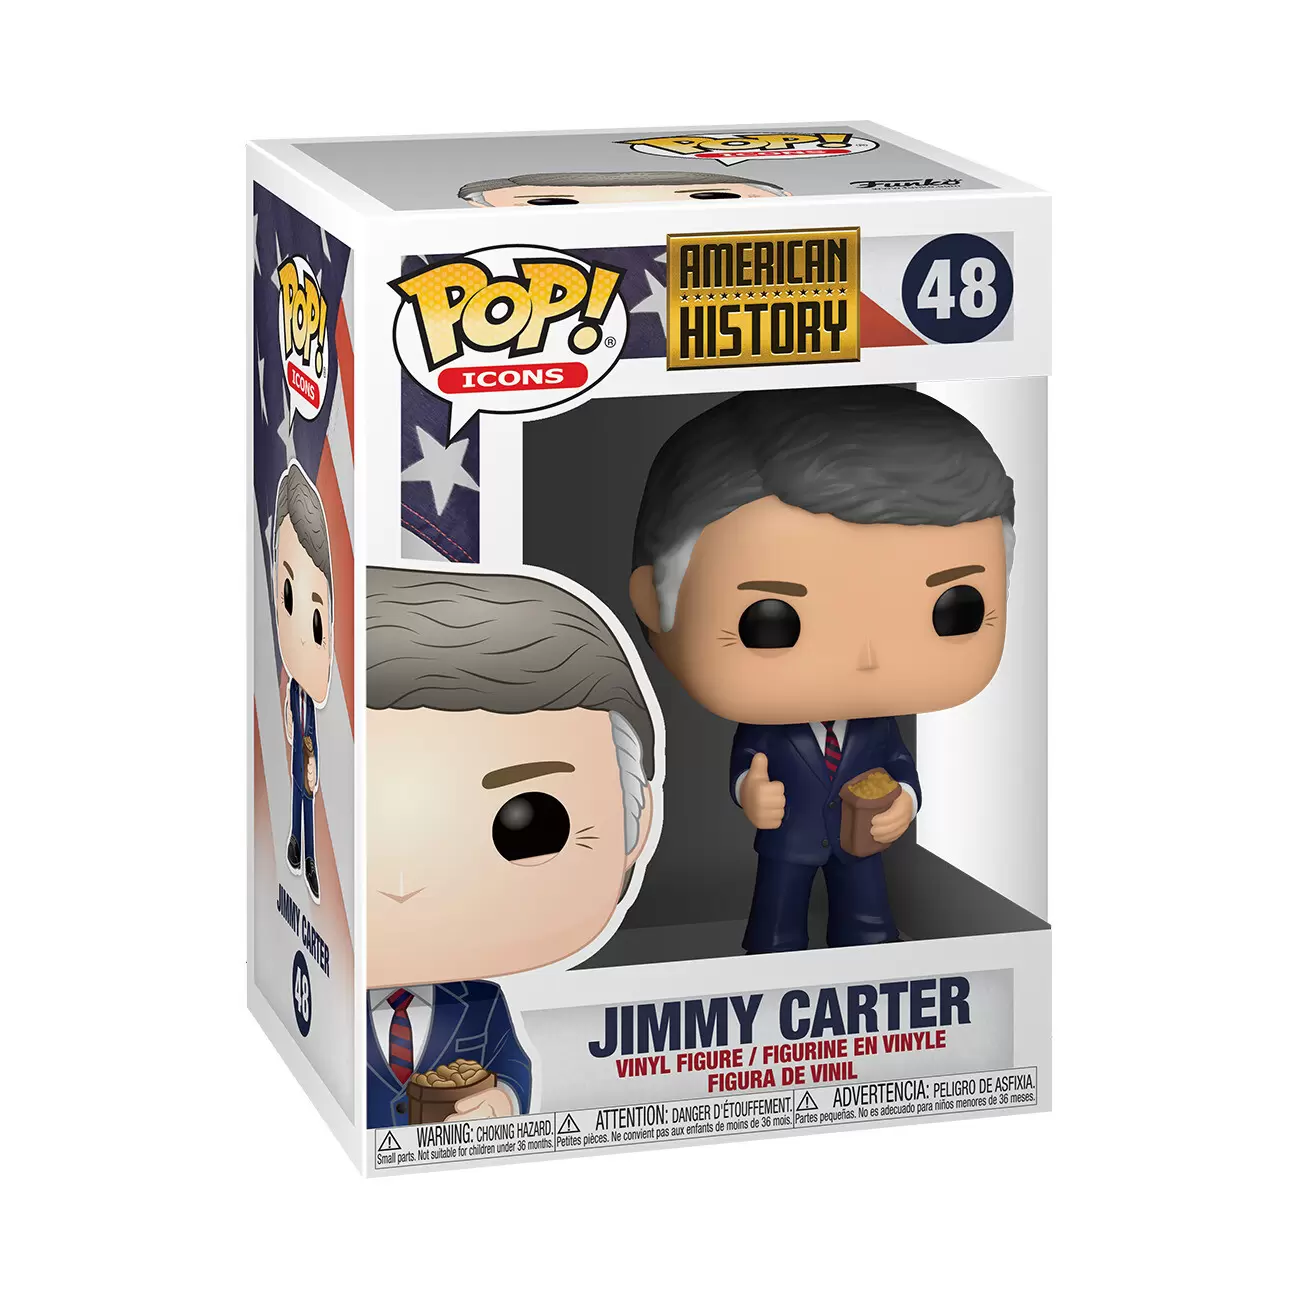 POP! Icons - American History - Jimmy Carter